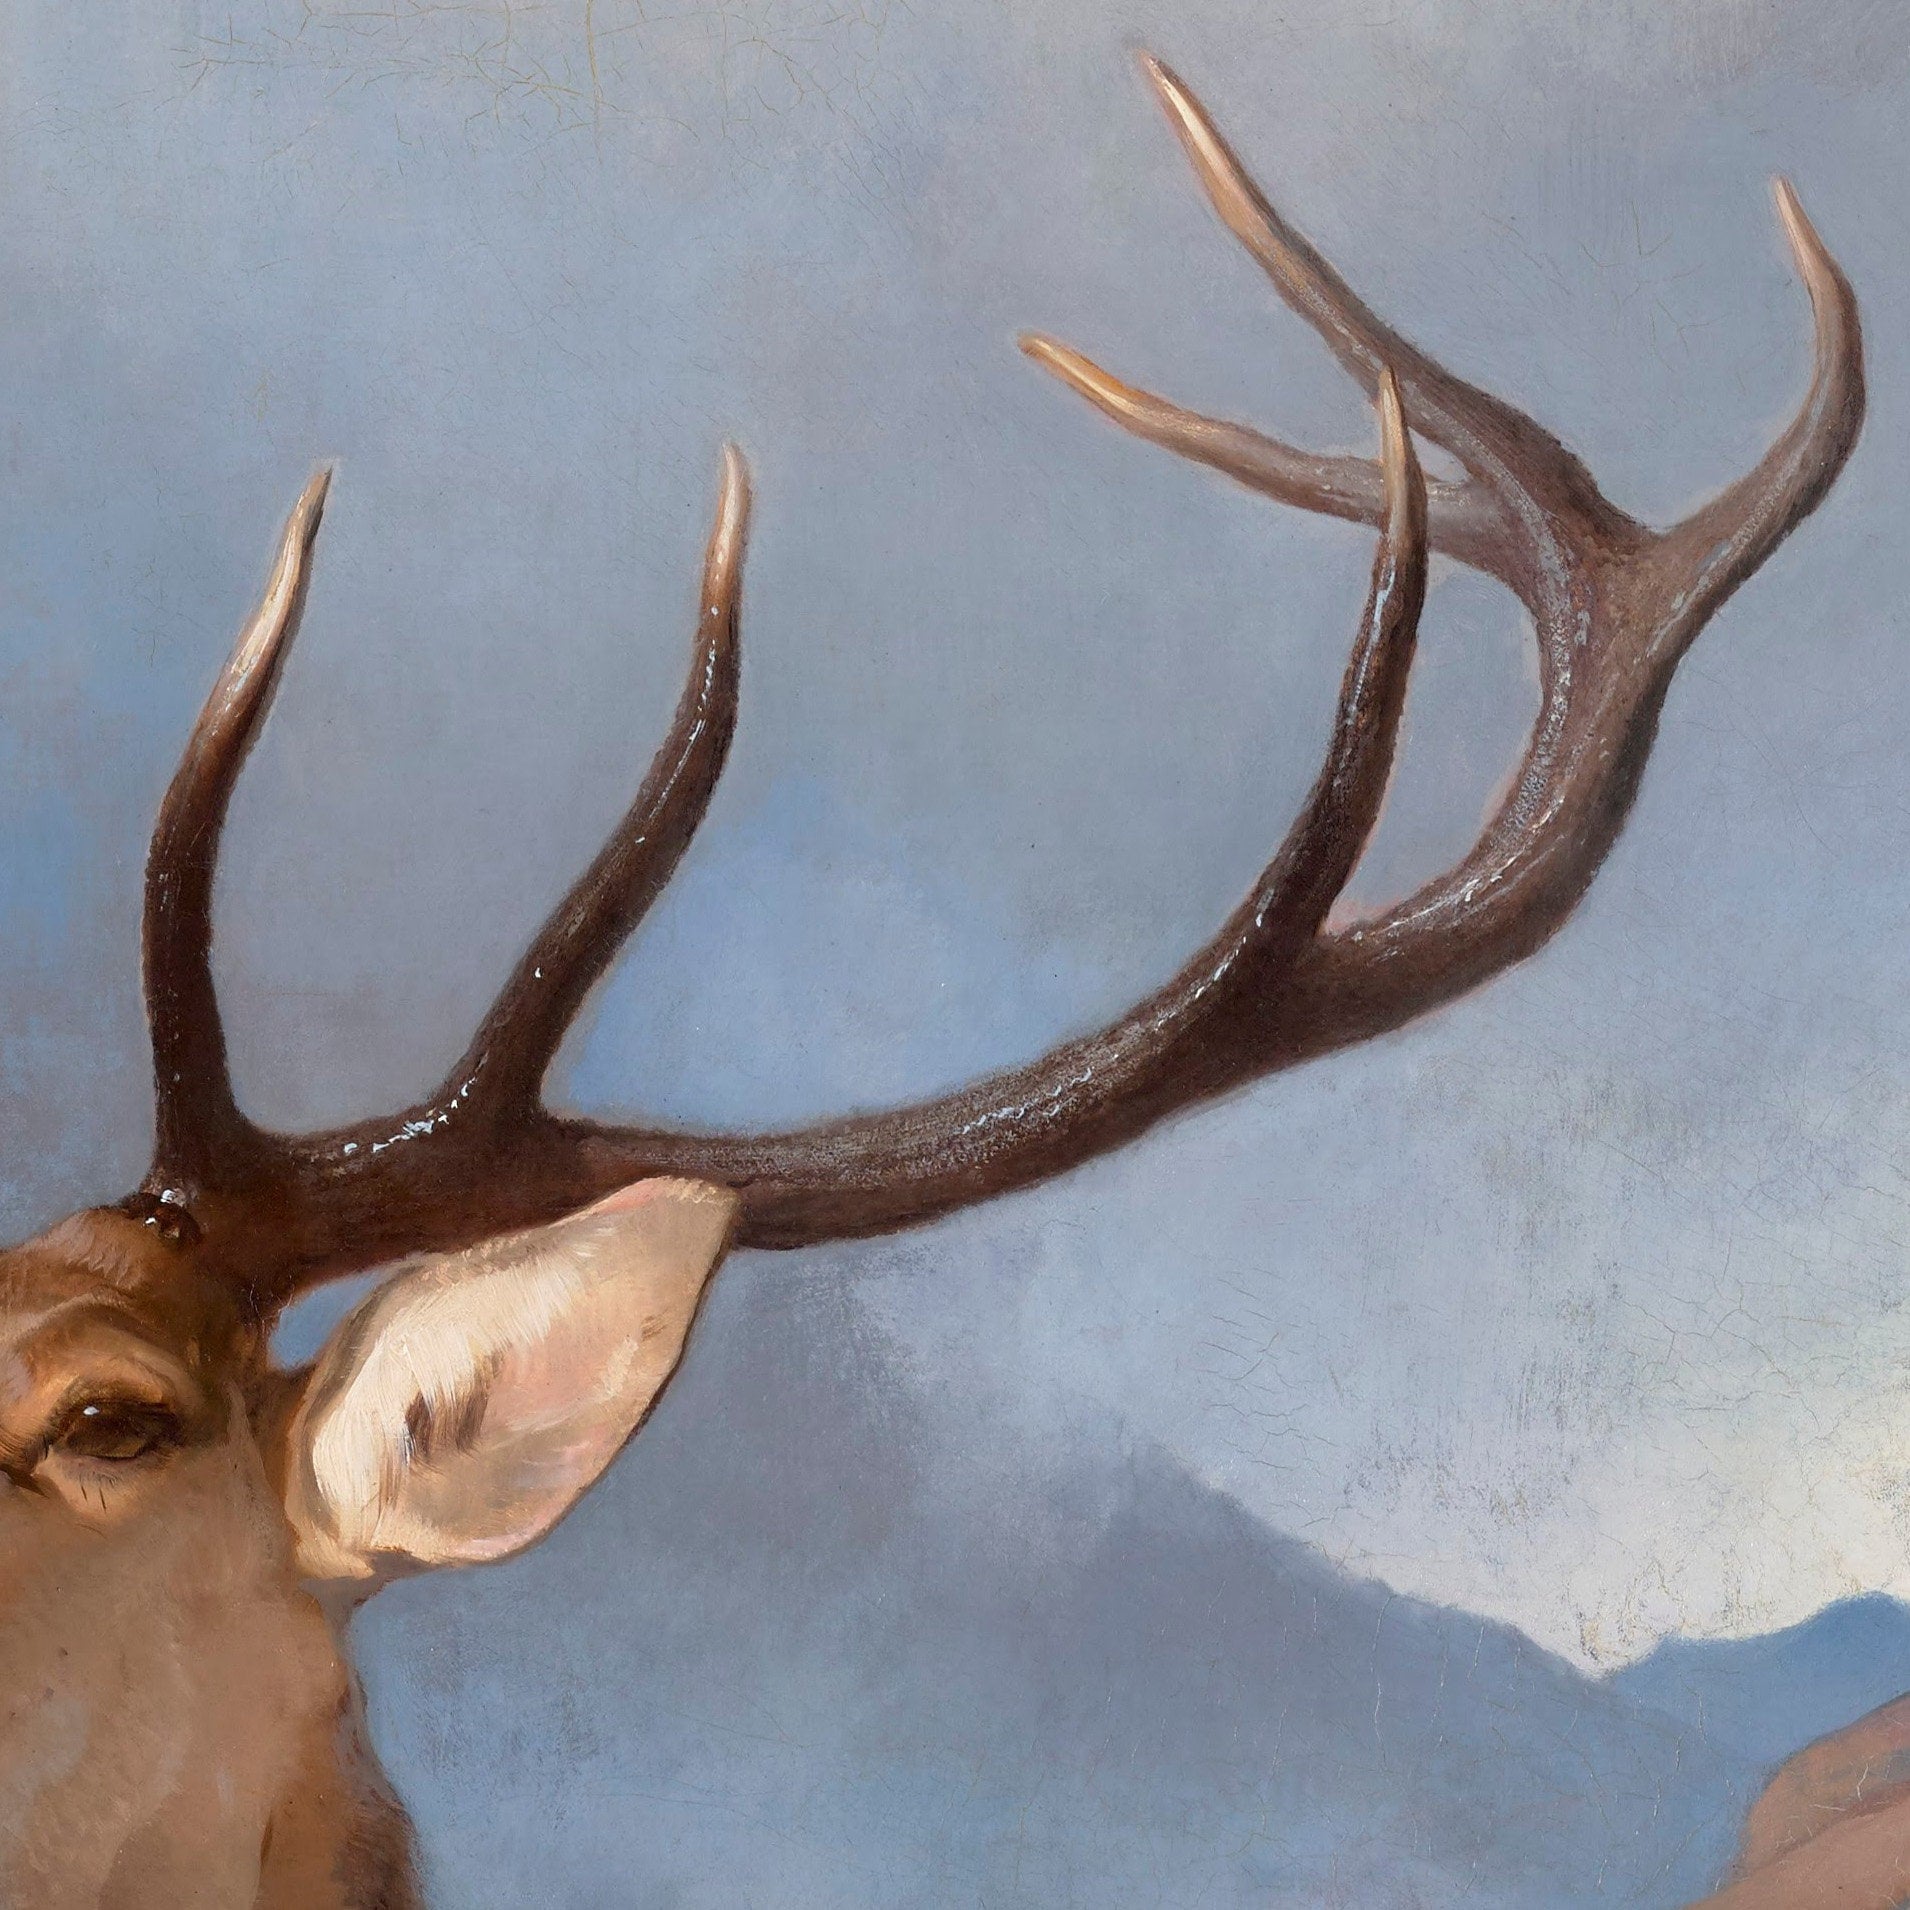 The Monarch of the Glen by Edwin Landseer, 3d Printed with texture and brush strokes looks like original oil-painting, code:027